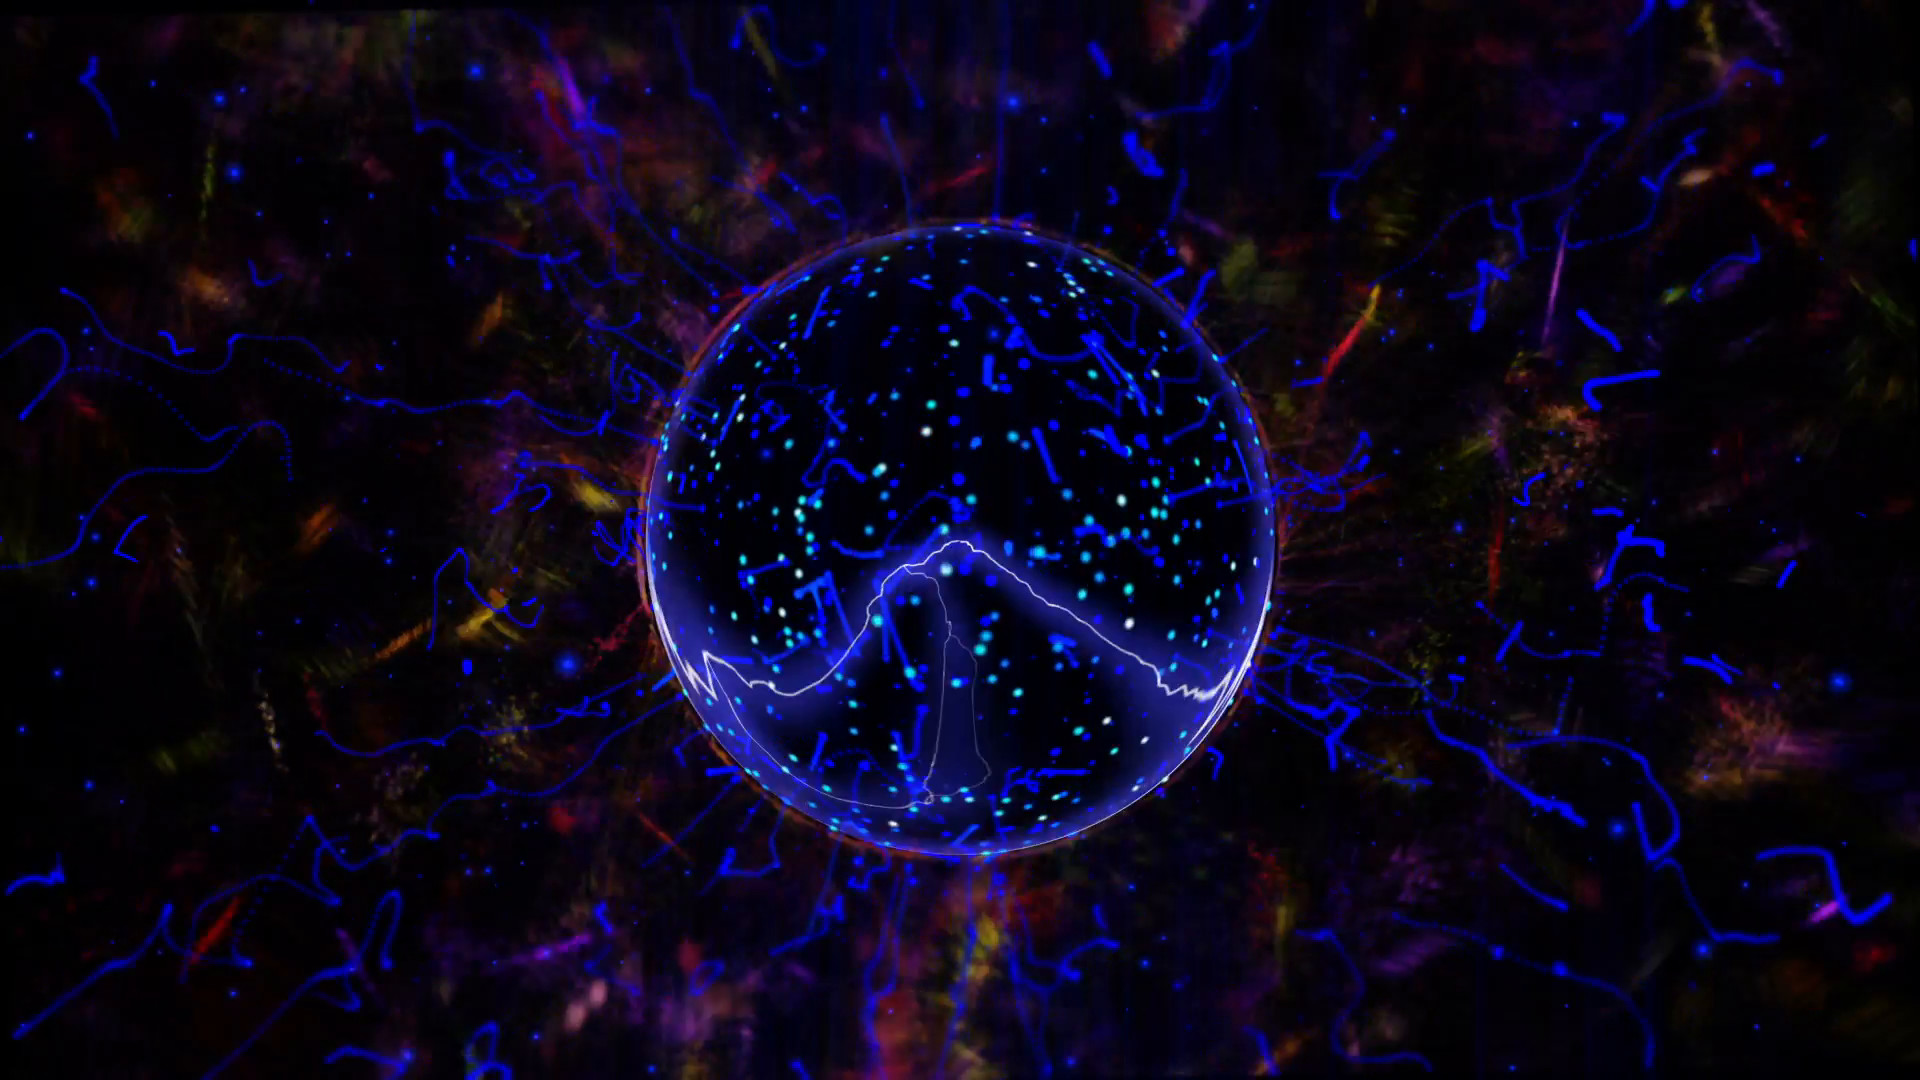 1920x1080 LOOPED VJ creative (energy,abstract,techno,electronic,dubstep) Background  for music festival, disco and etc...!!! Motion Background - VideoBlocks